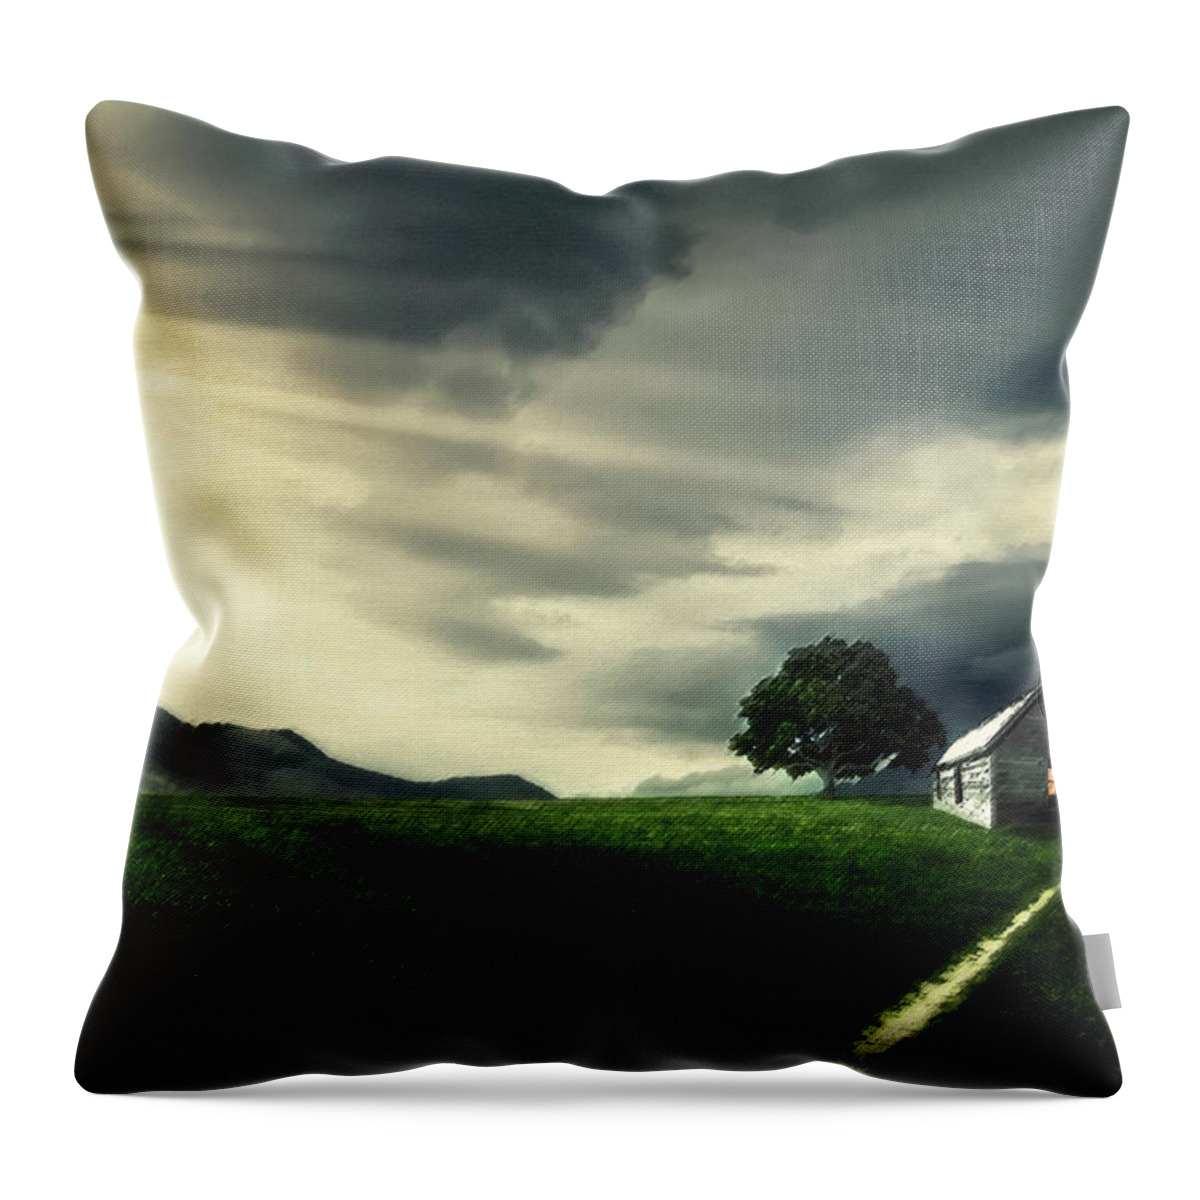 Architecture Throw Pillow featuring the photograph Village by Bess Hamiti